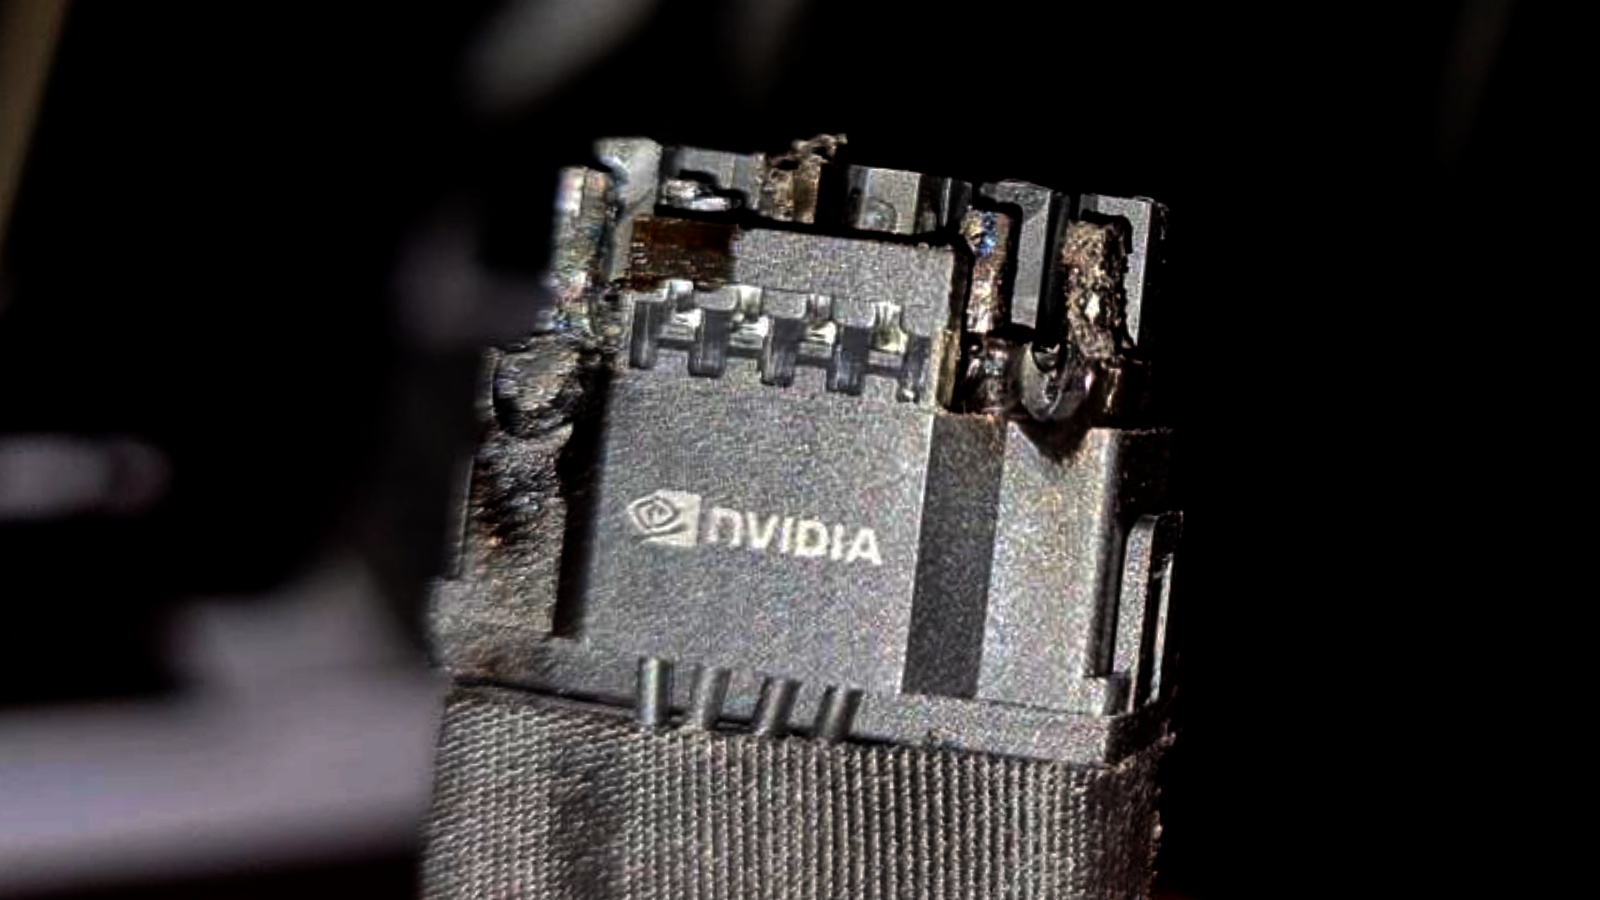 More information about the NVIDIA adapter from Igorslab : r/nvidia